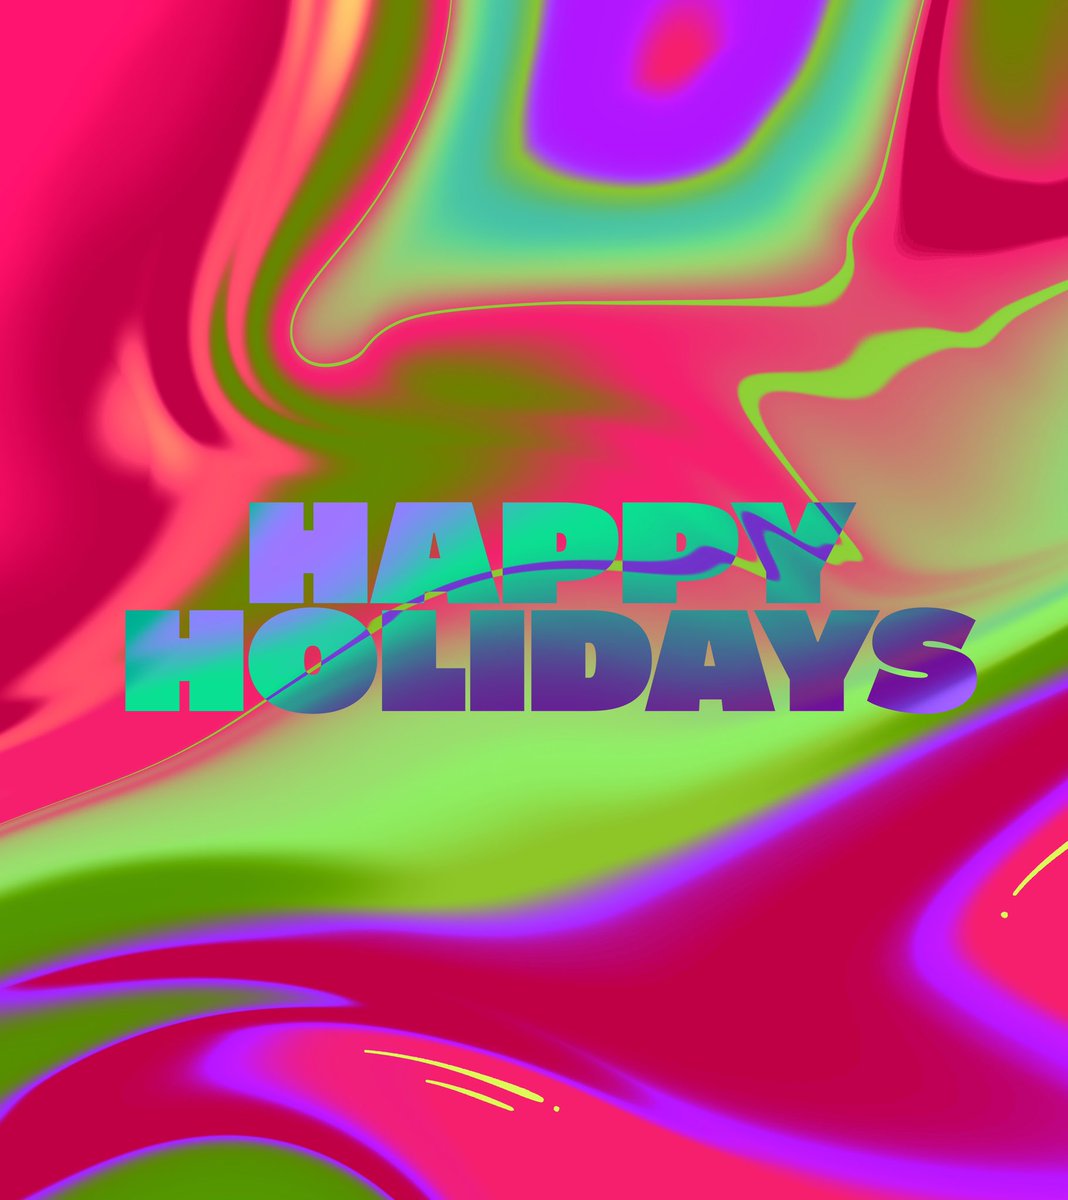 Happy Holidays to all you beautiful souls. I hope this season is colorful and joyful!